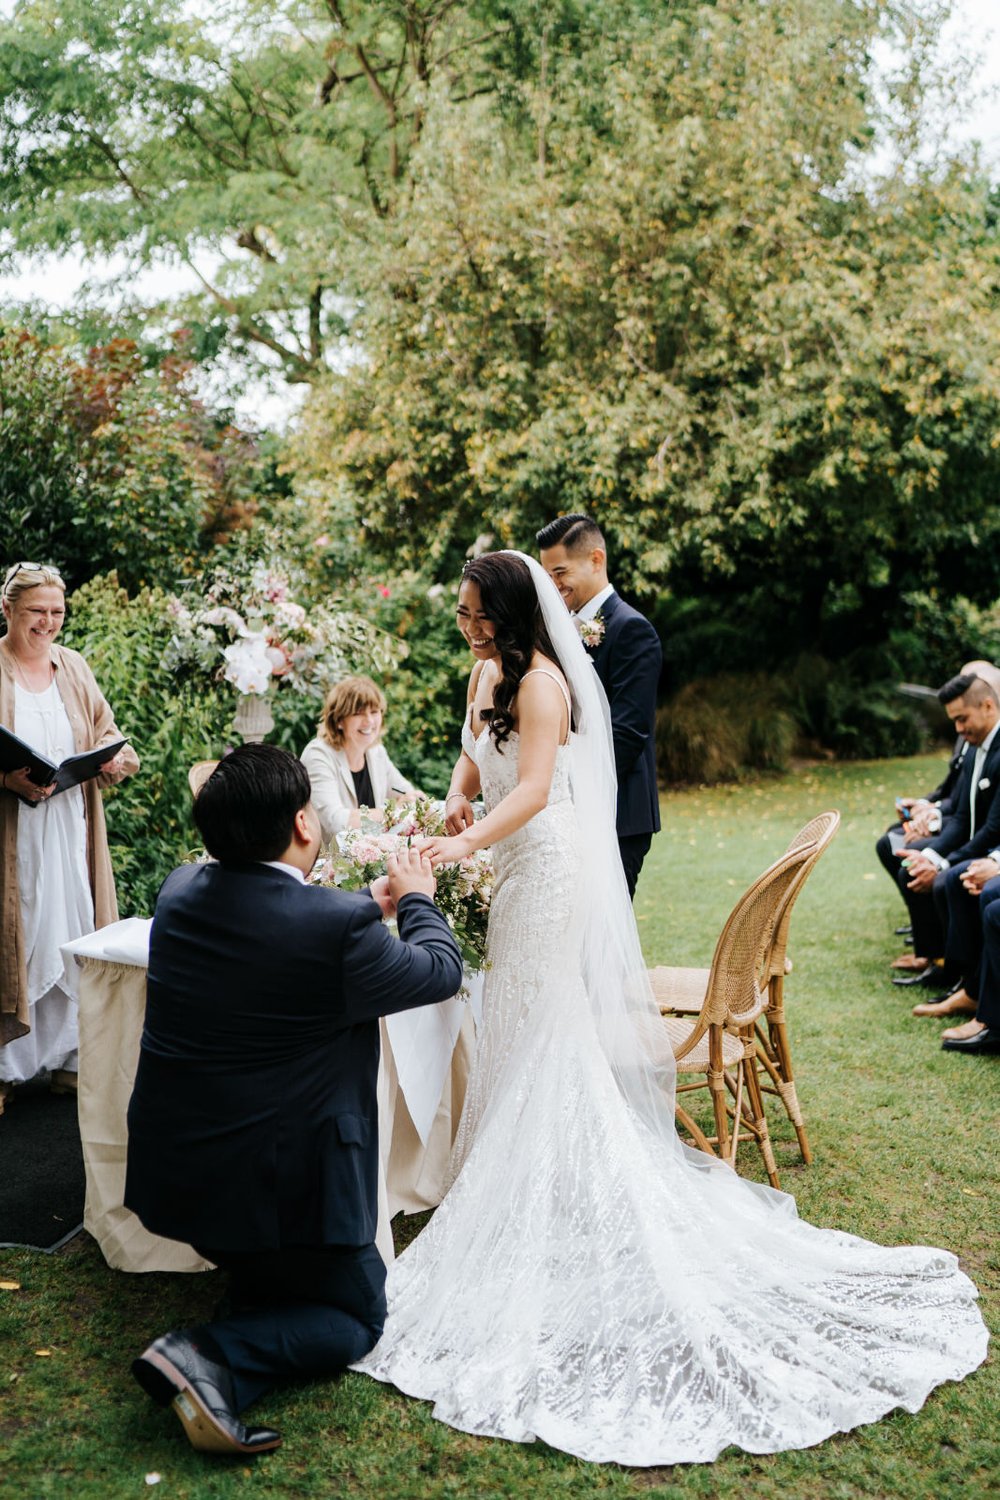 Bride smiles as best man gives her wedding ring while kneeling during wedding ceremony at Bingham Riverhouse in Richmond